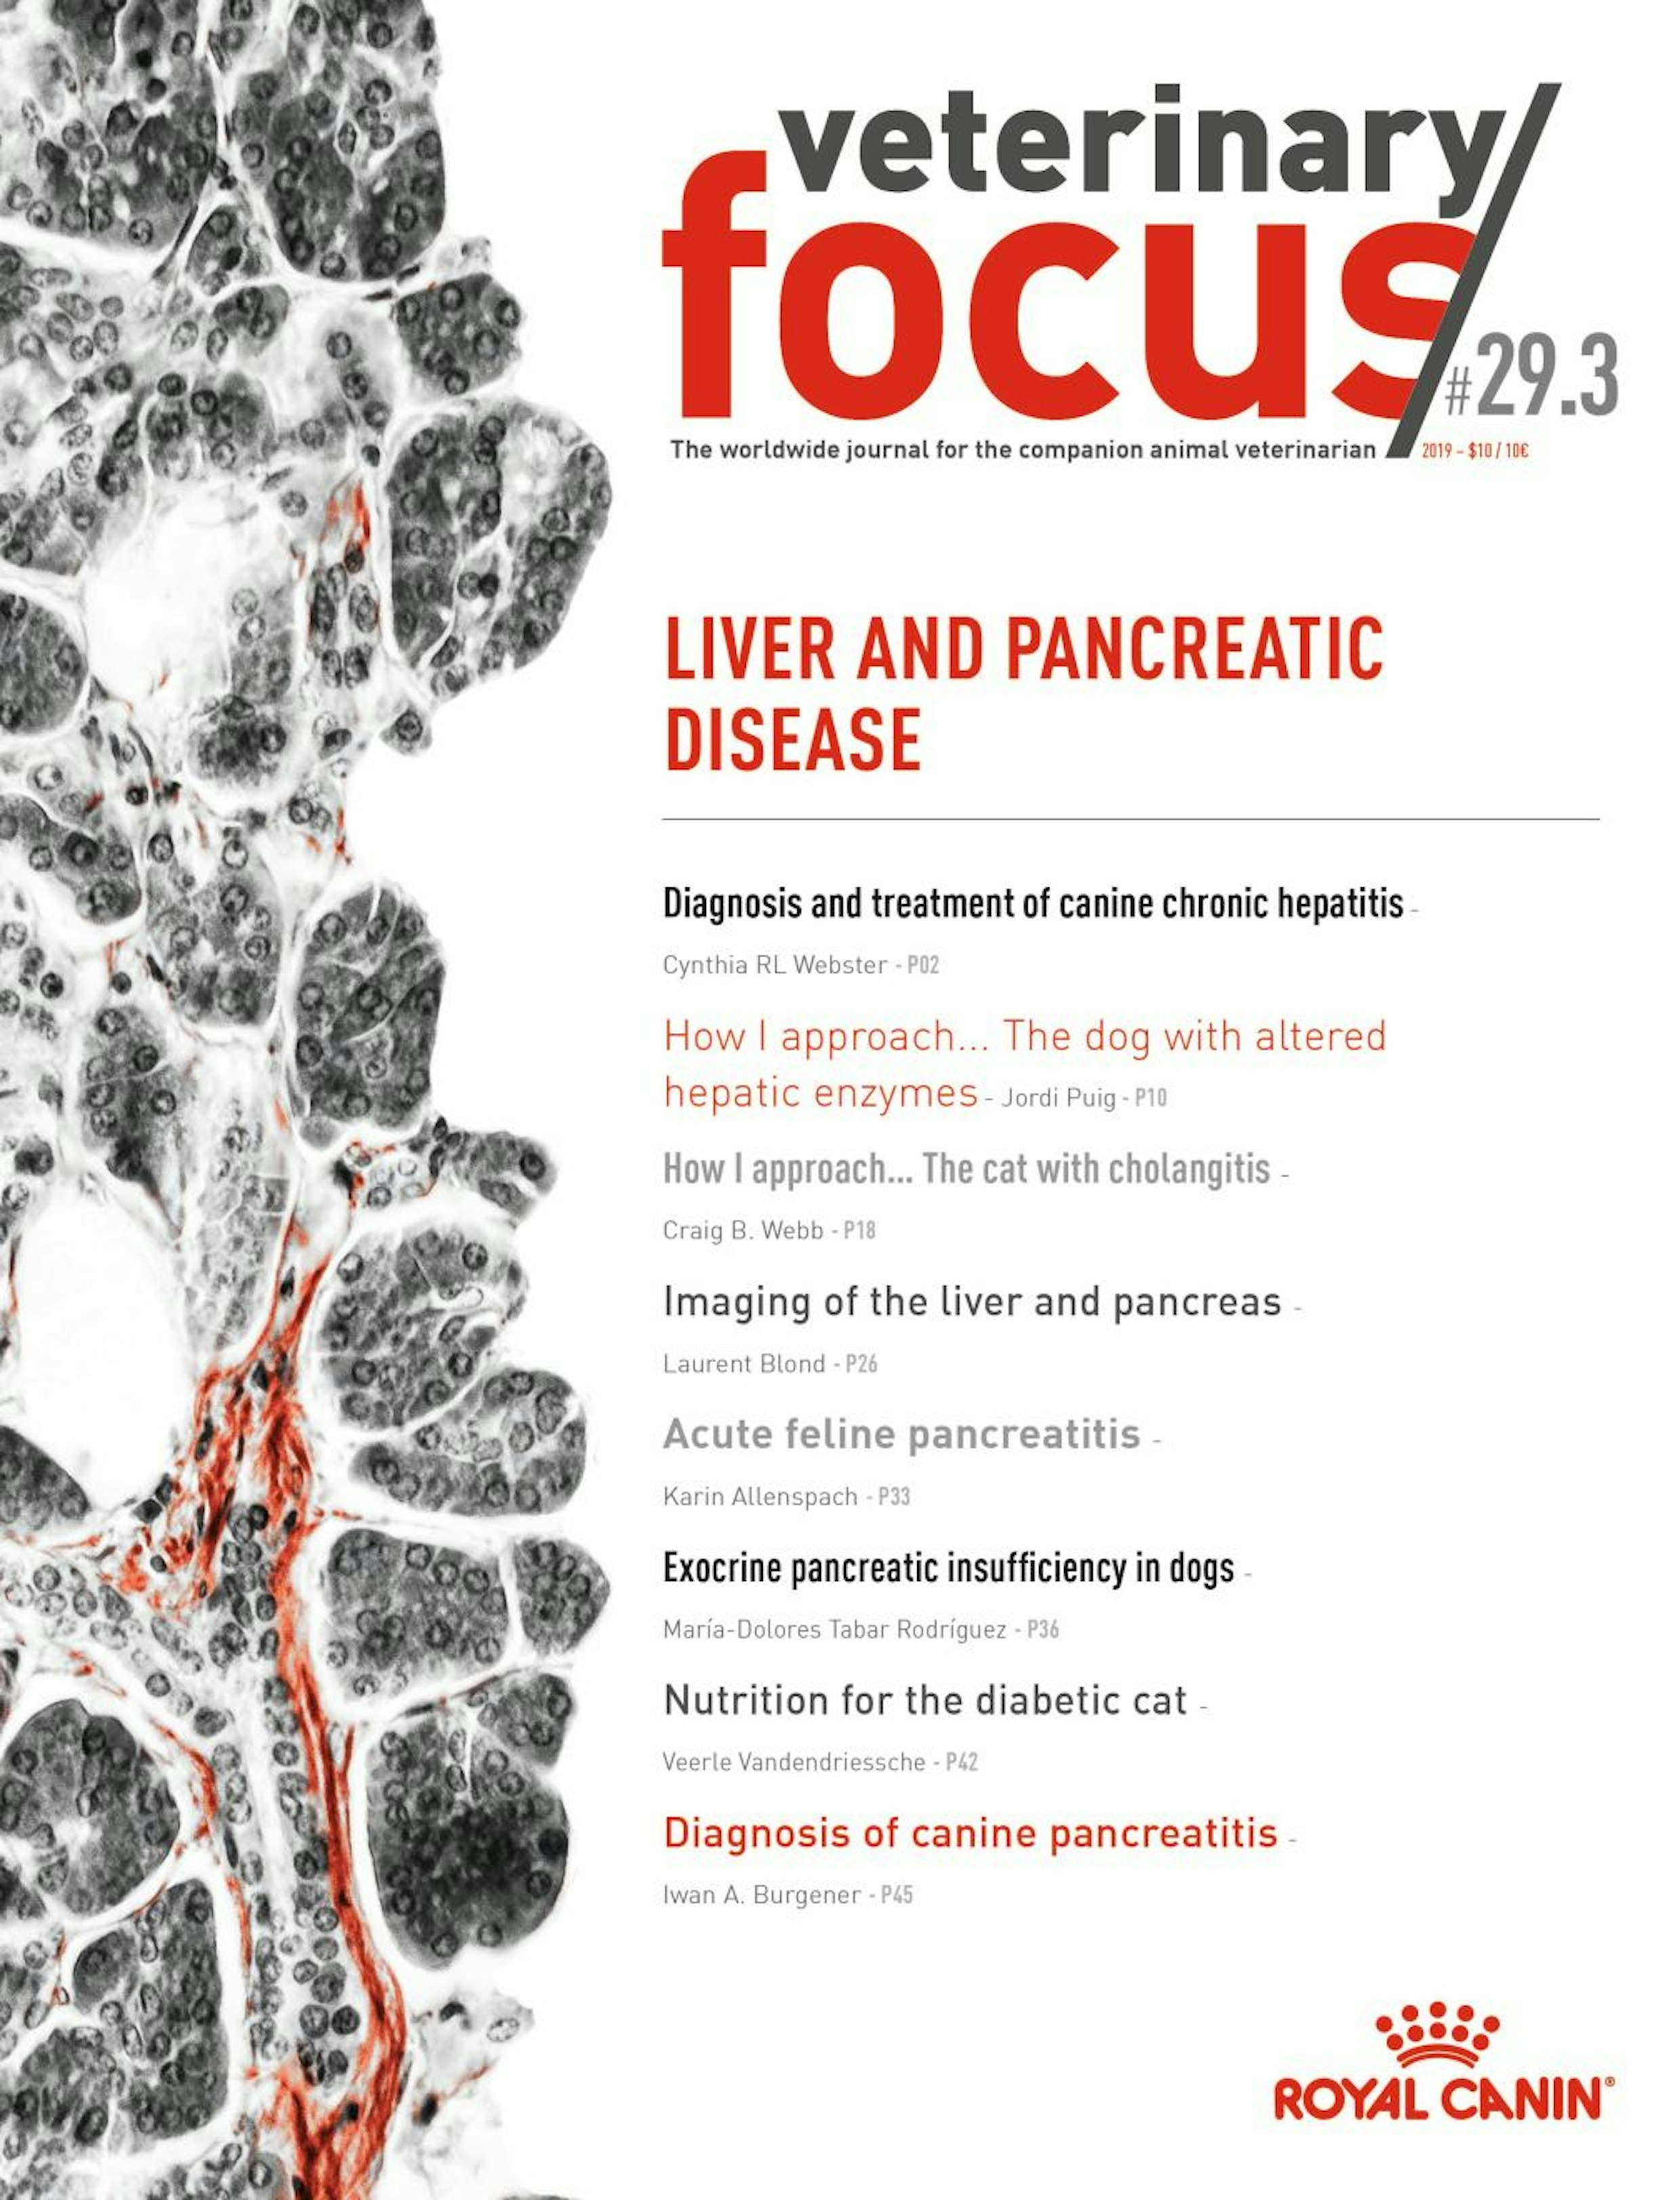 Diseases of the liver and pancreas